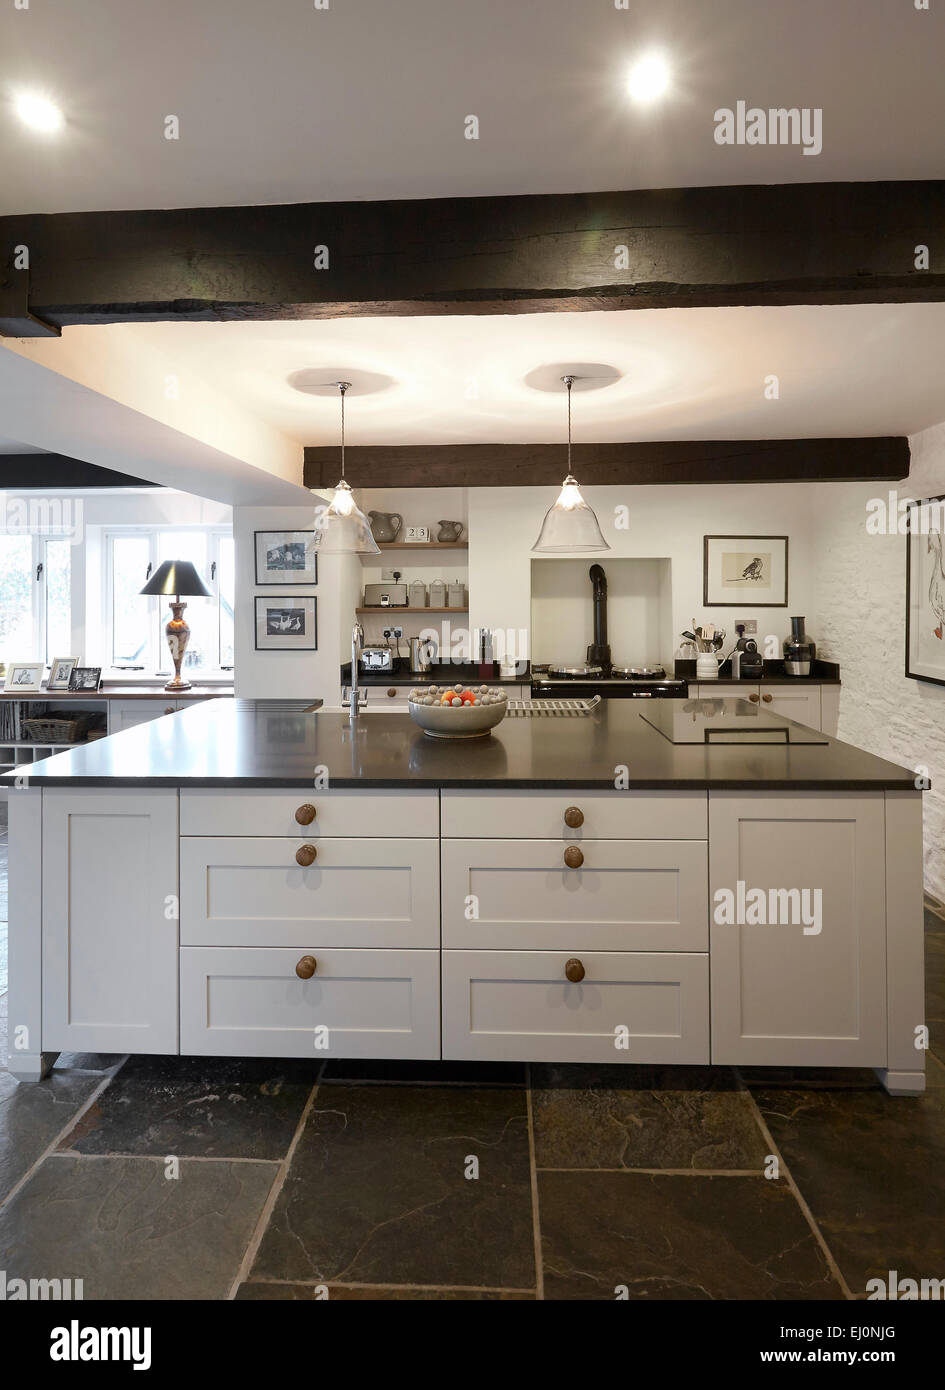 A White Country Style Kitchen In A Farmhouse In The Uk Stock Photo